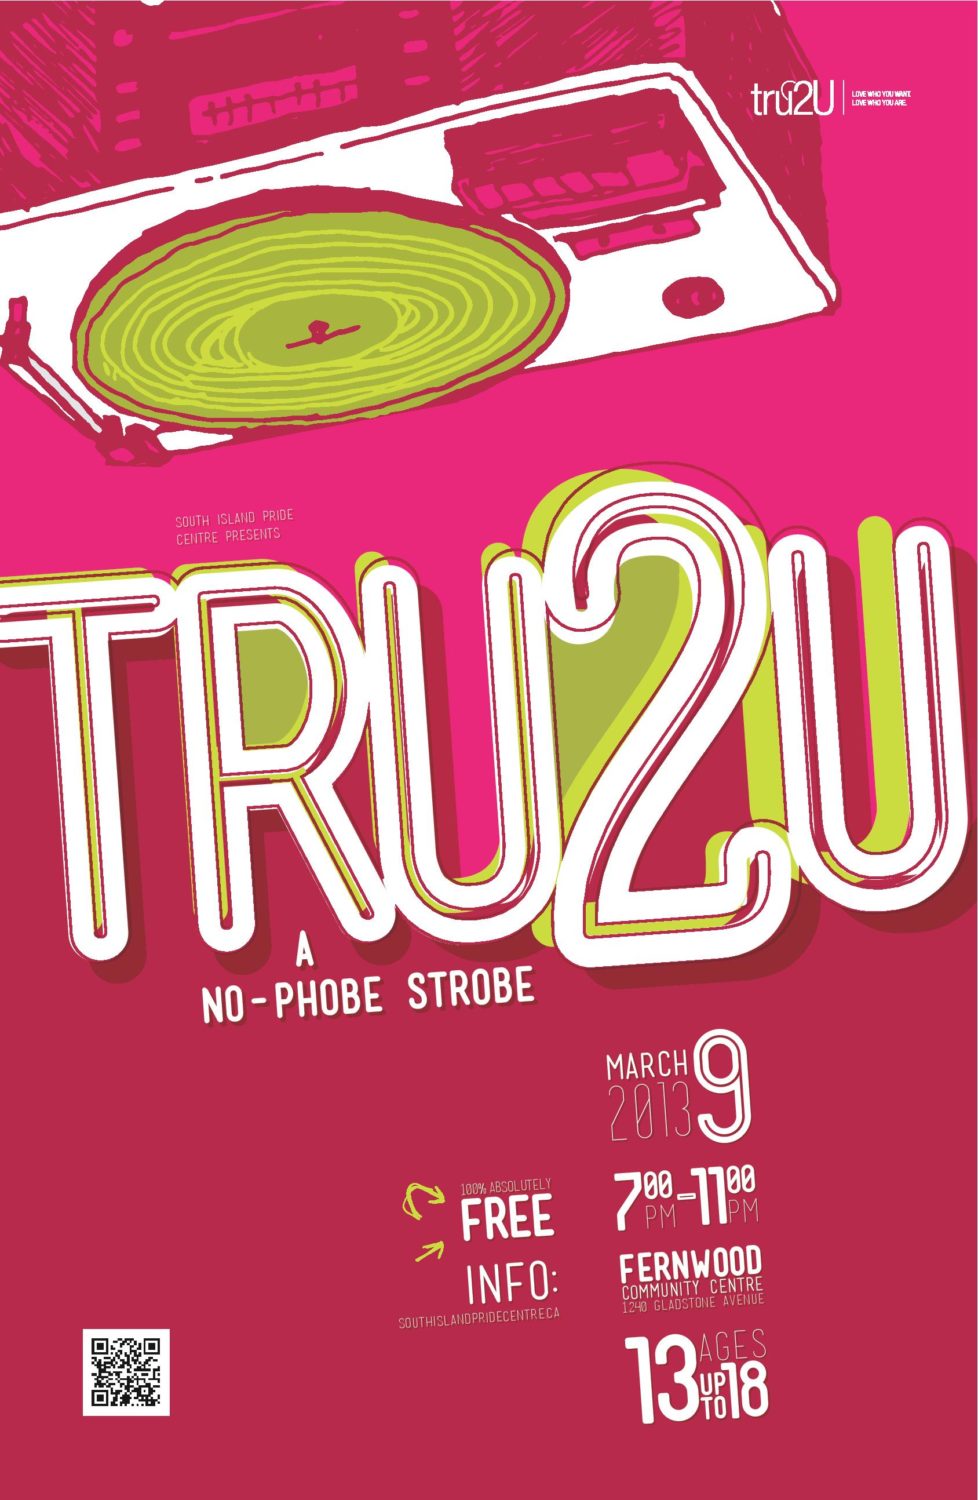 Poster for tru2u youth dance at fernwood community centre March 8th.